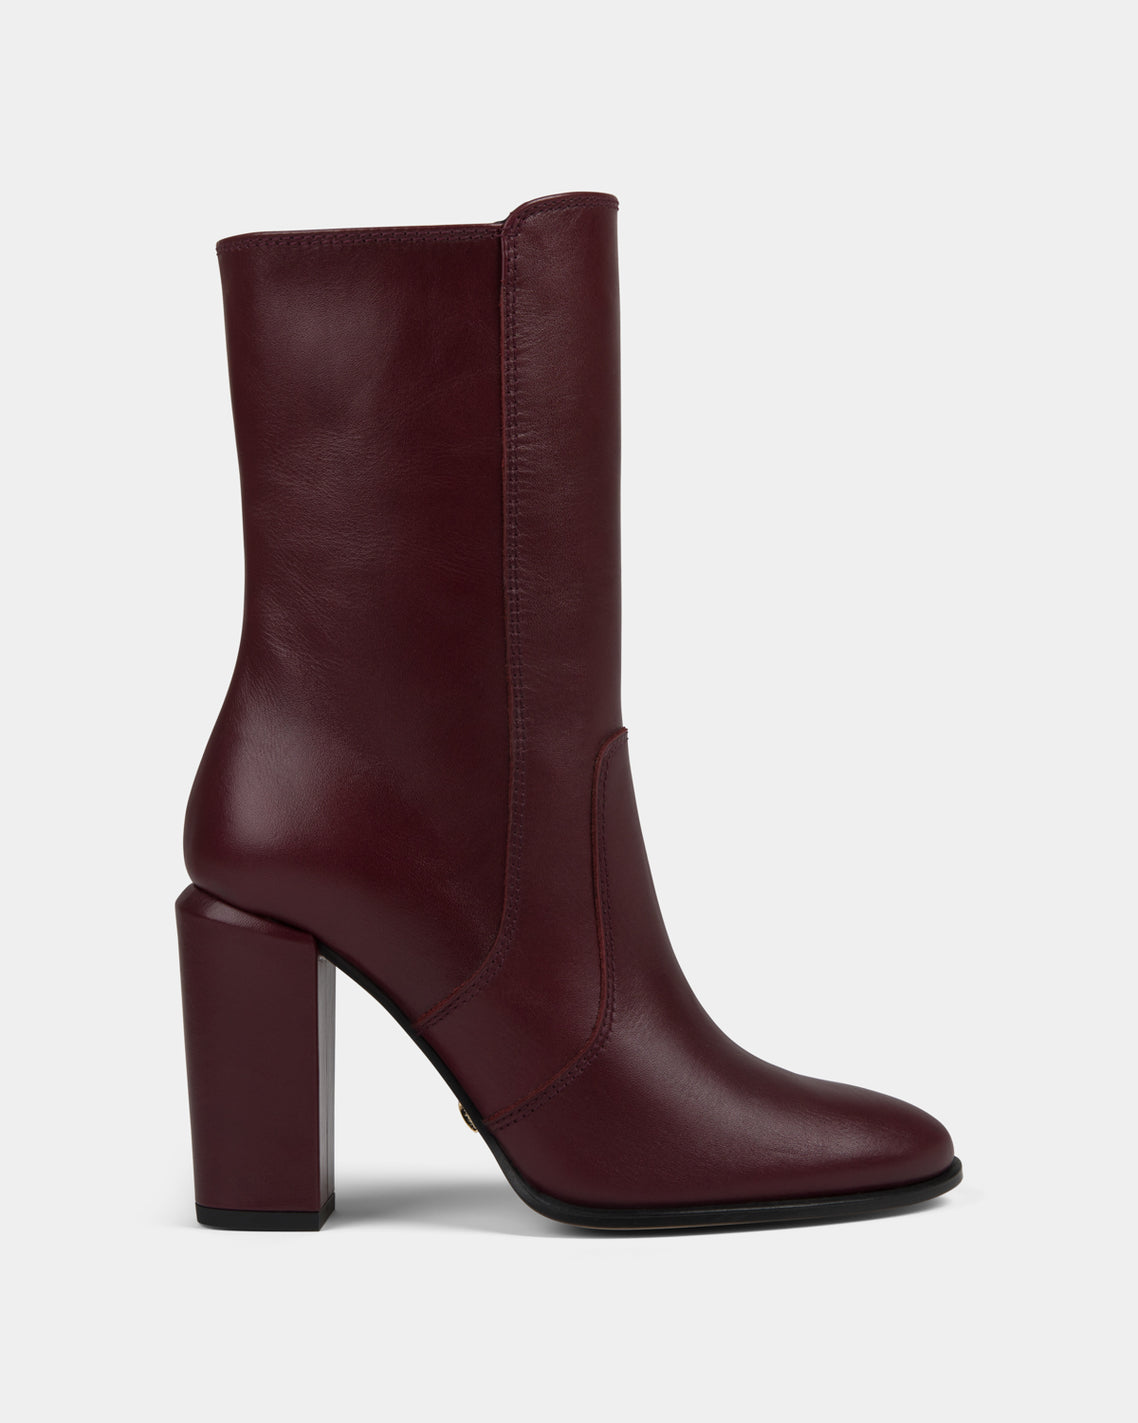 kallu-kallú-burgundy-leather-shoes-for-women-made-in-spain-boots-ankle-boots-booties-low-cut-boots